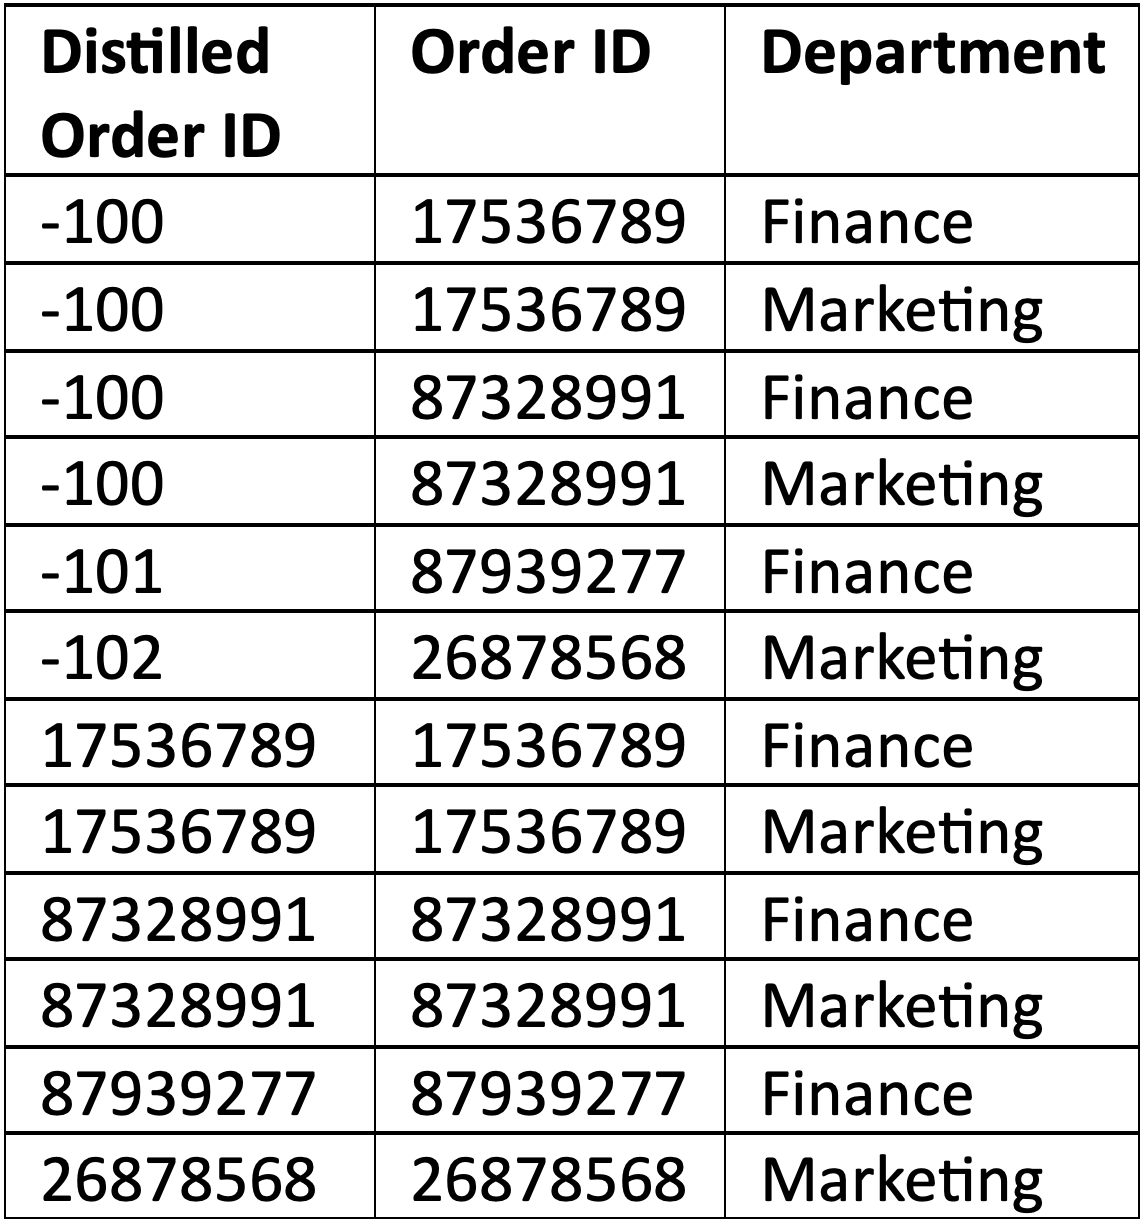 Table of Distilled Order ID, Order ID, and Department